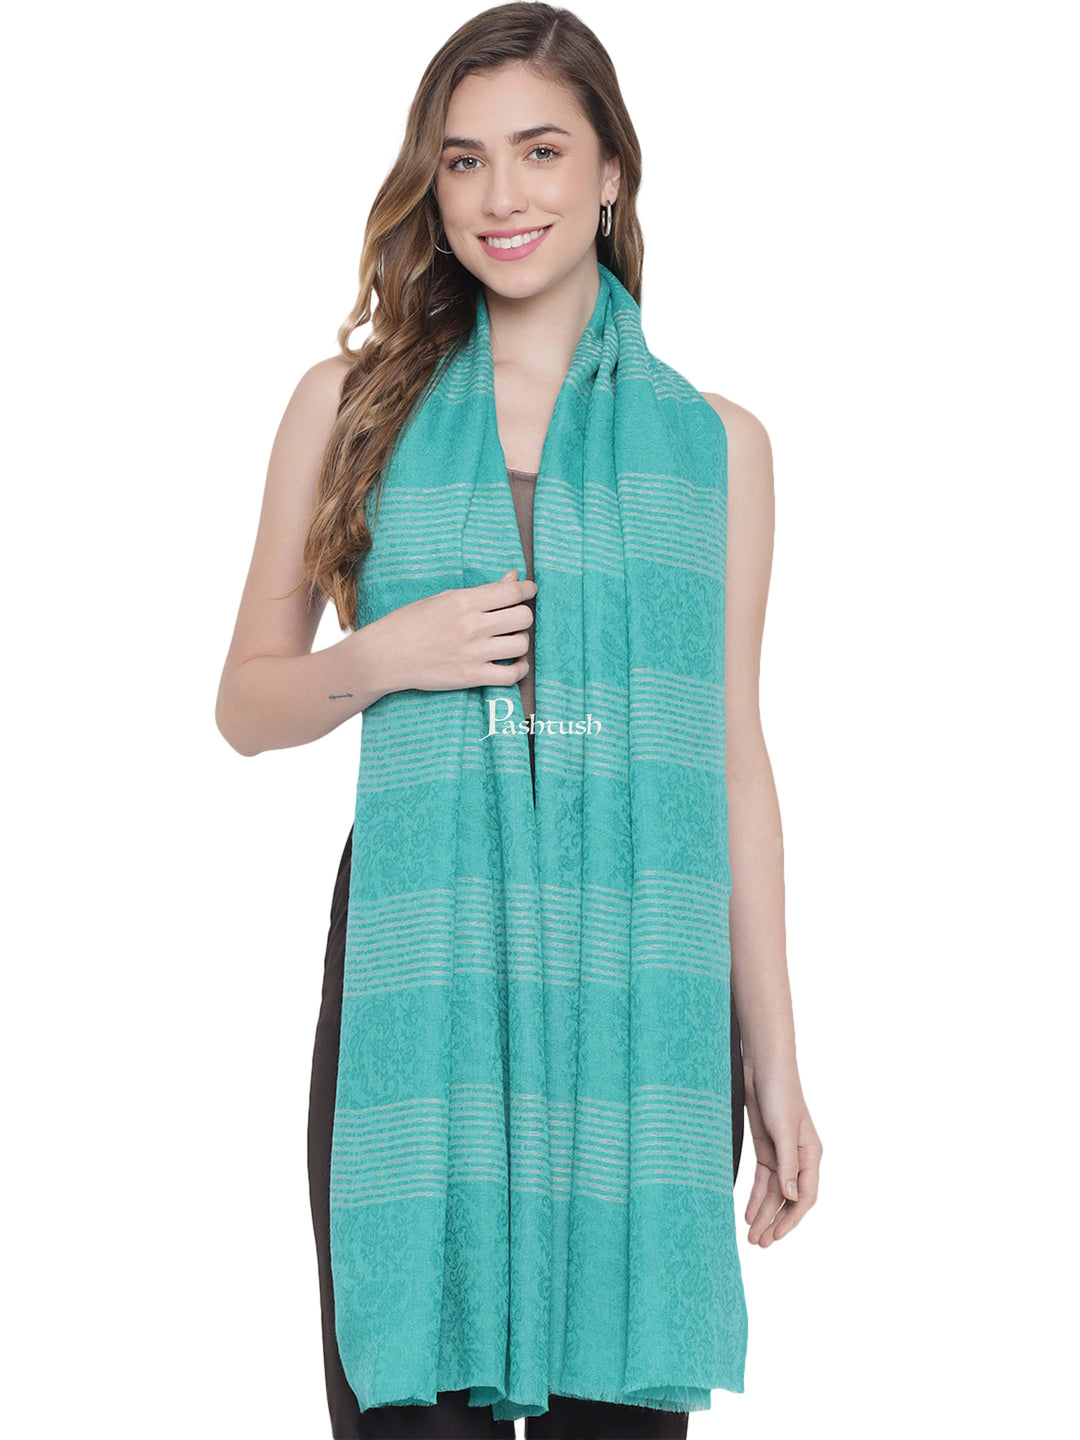 Pashtush India Womens Stoles and Scarves Scarf Pashtush Womens Fine Wool Stole, Striped Weave, Peruvian Green